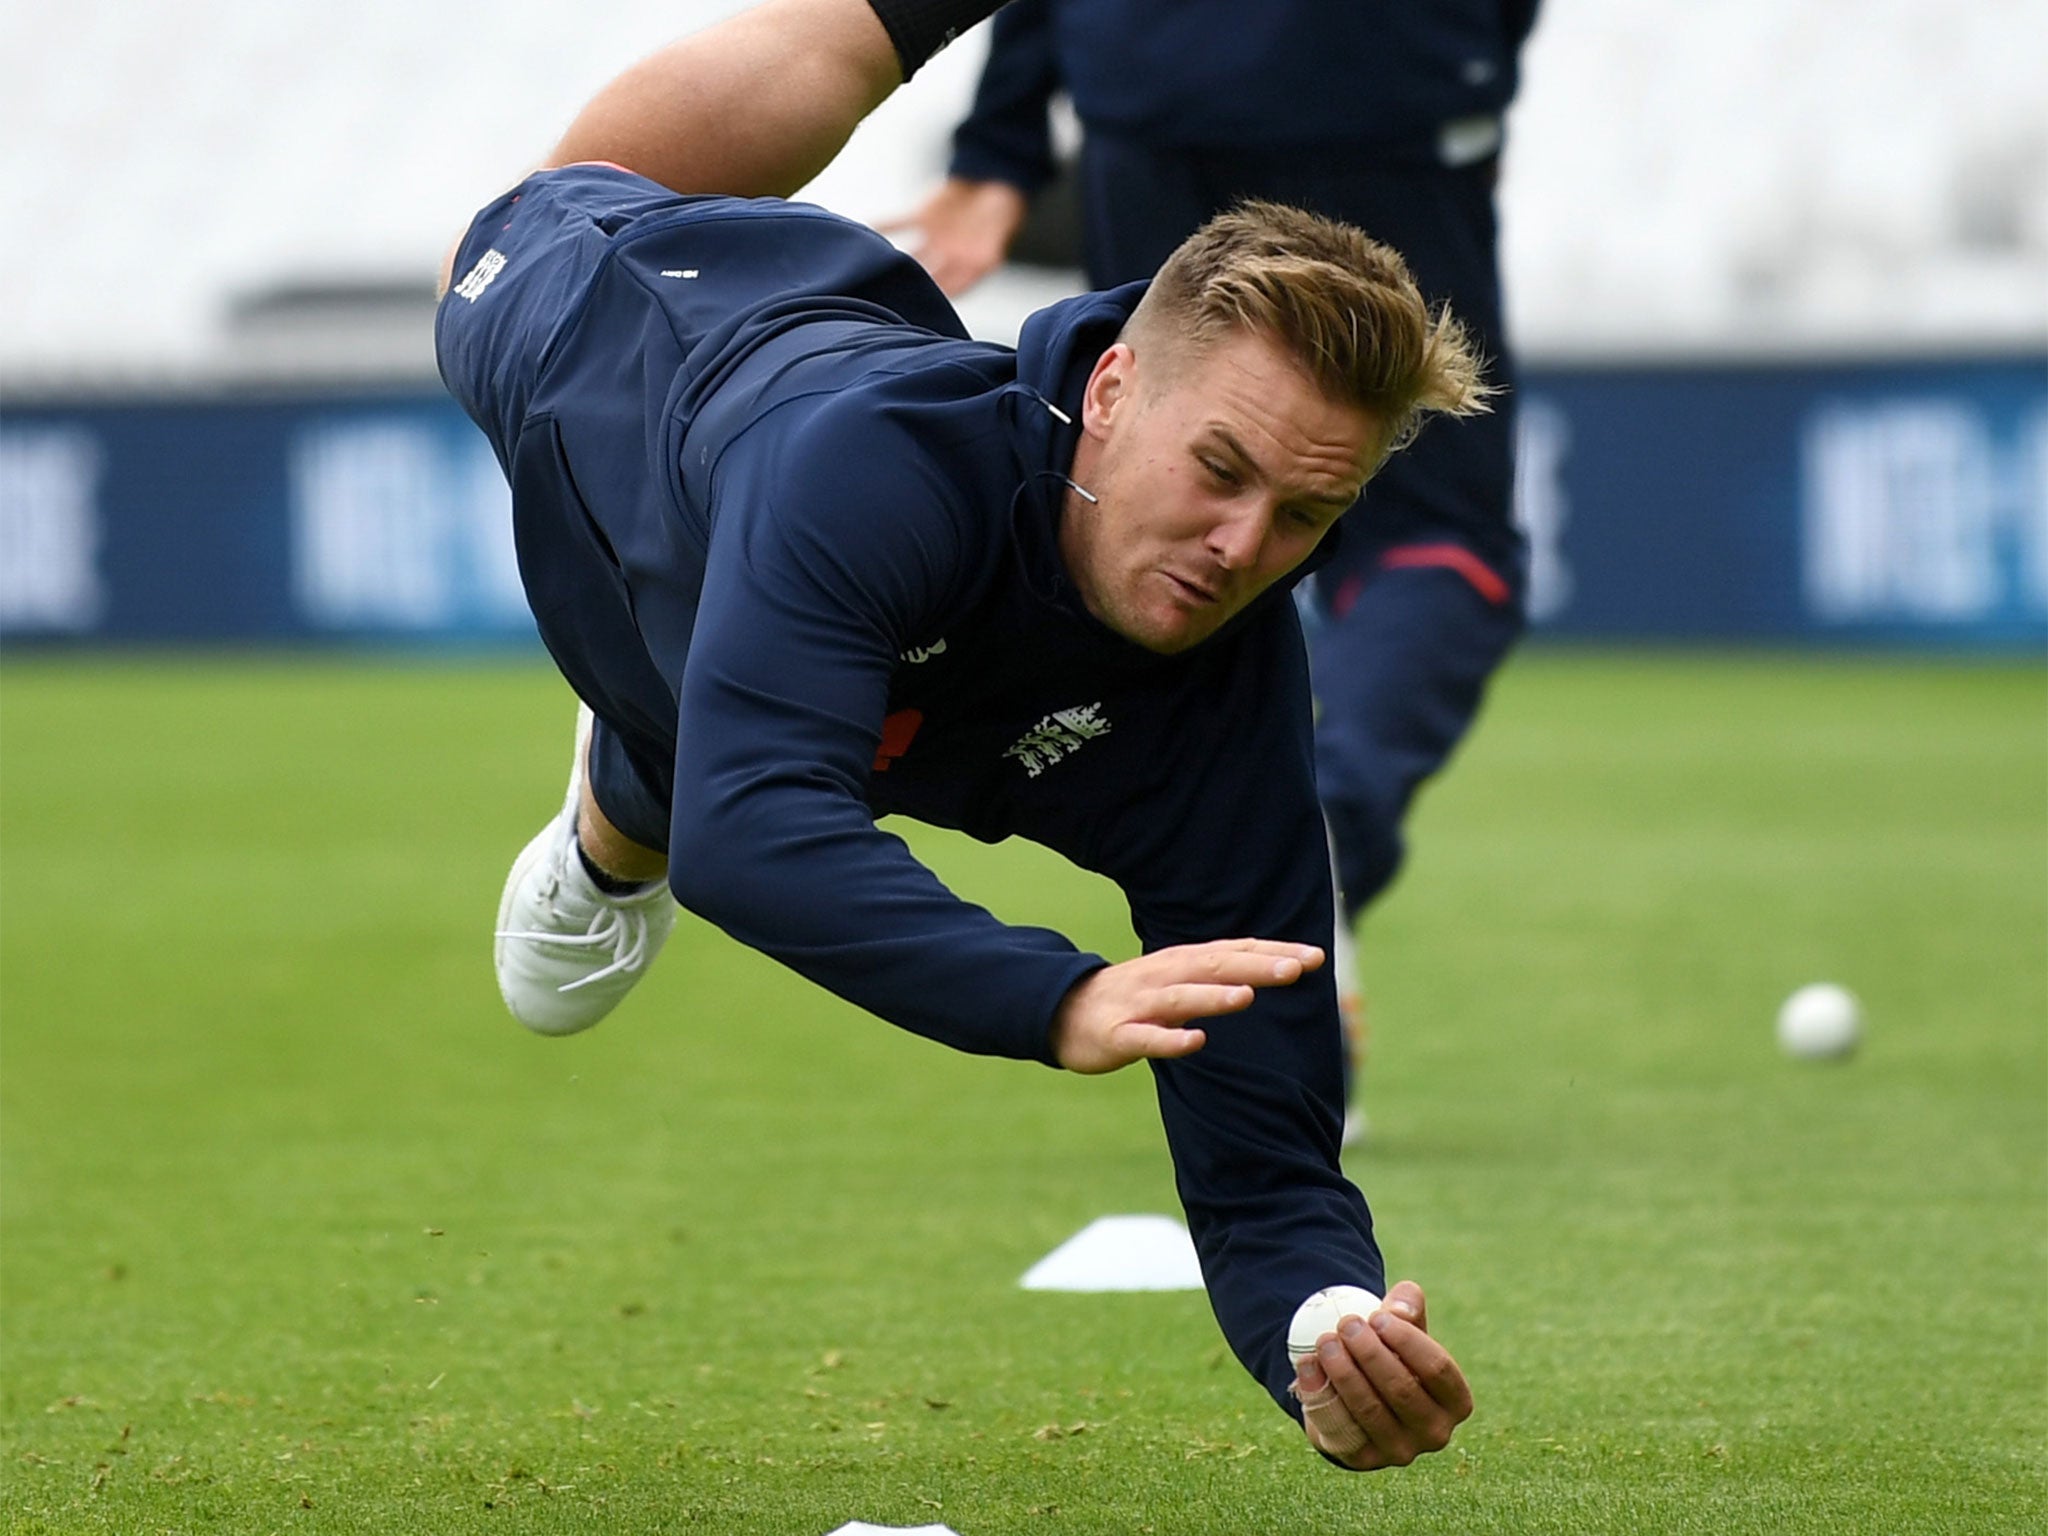 No drops: Jason Roy is not only playing vs Bangladesh, his place is assured